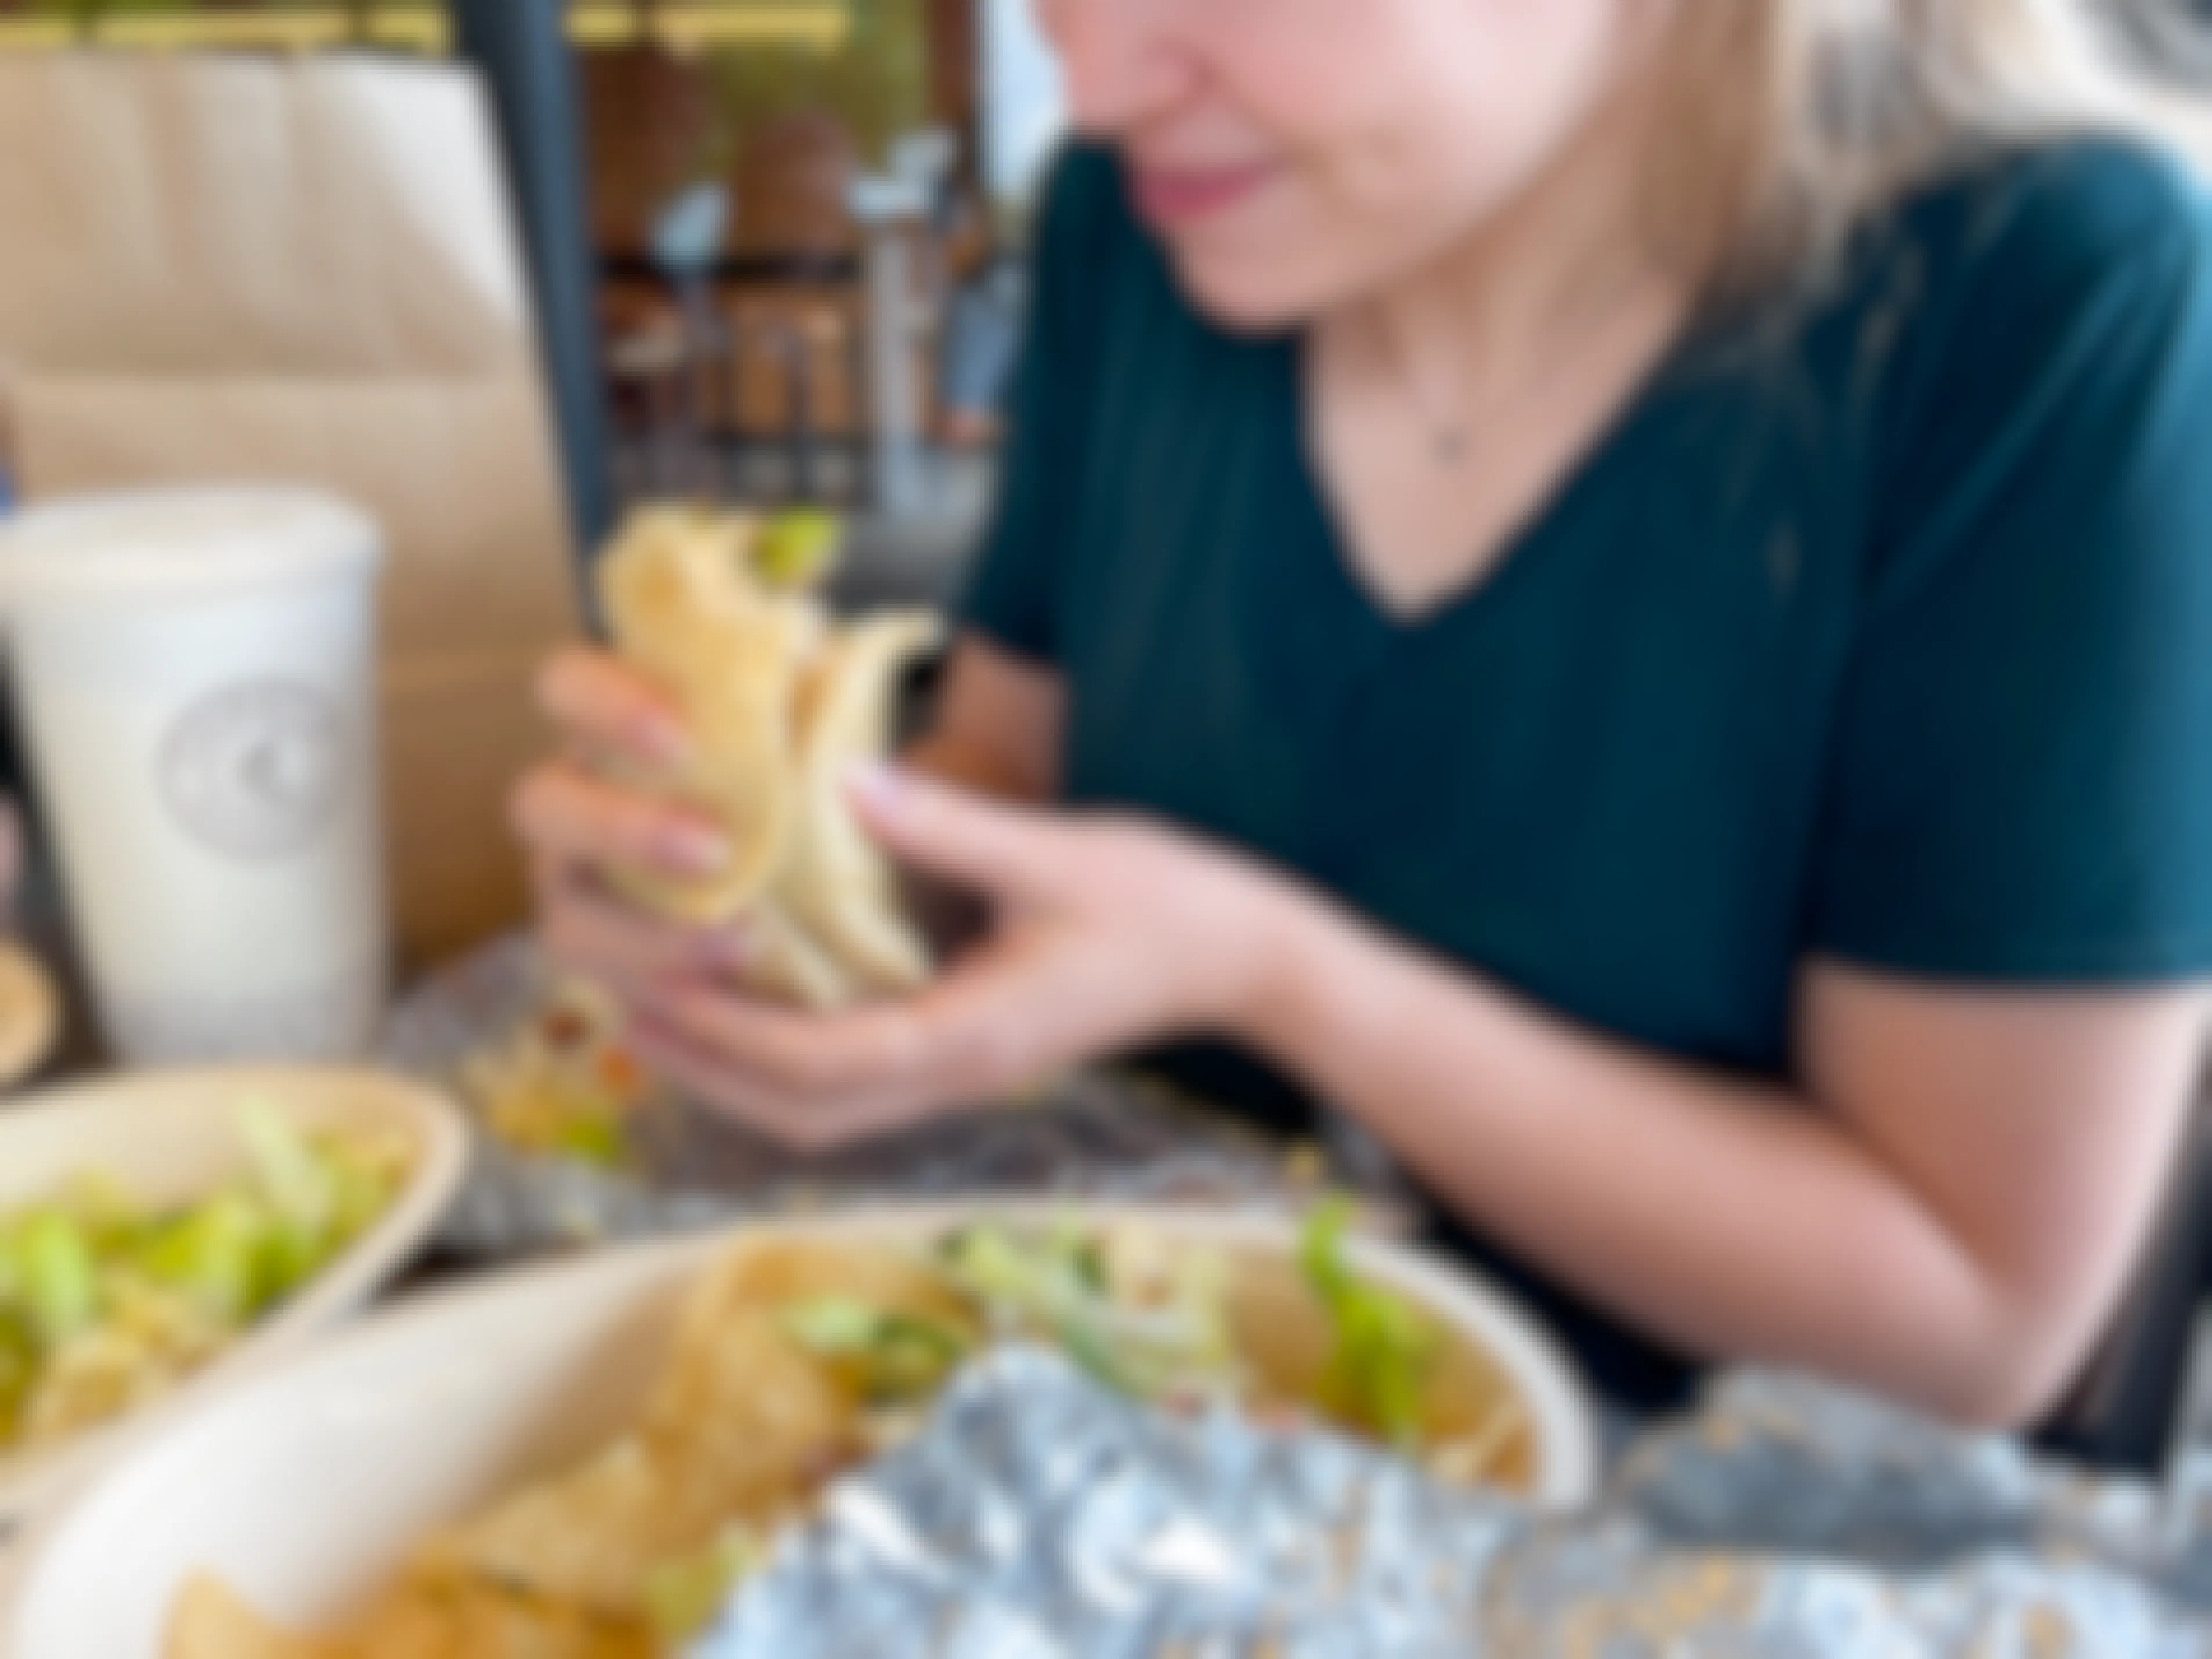 A woman eating food inside Chipotle